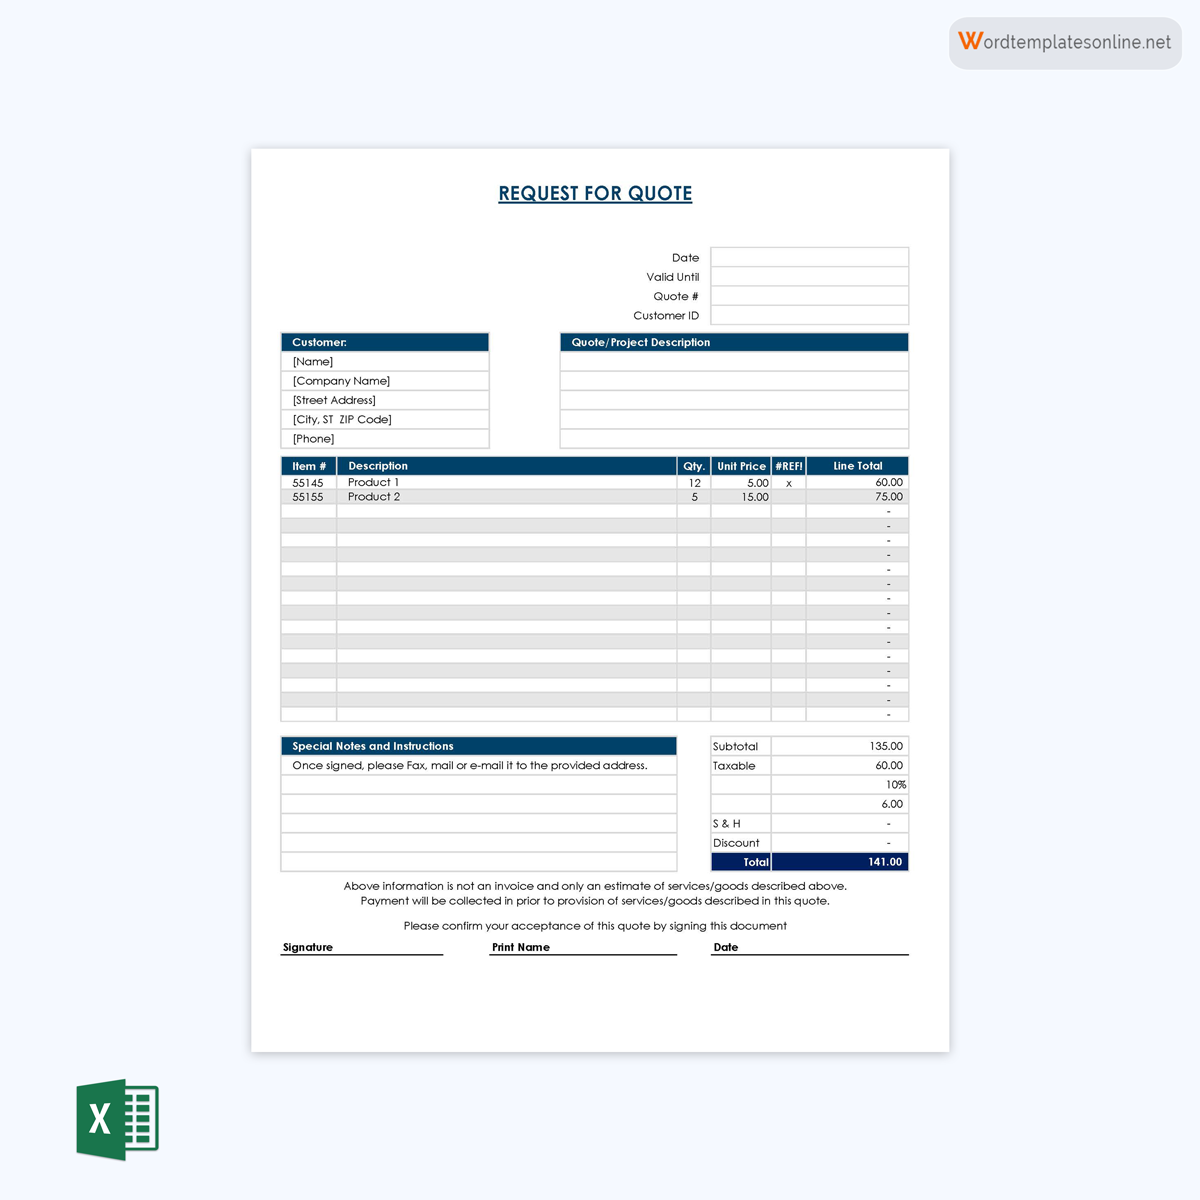 Editable Excel Format Request for Quote Sample - Download Now